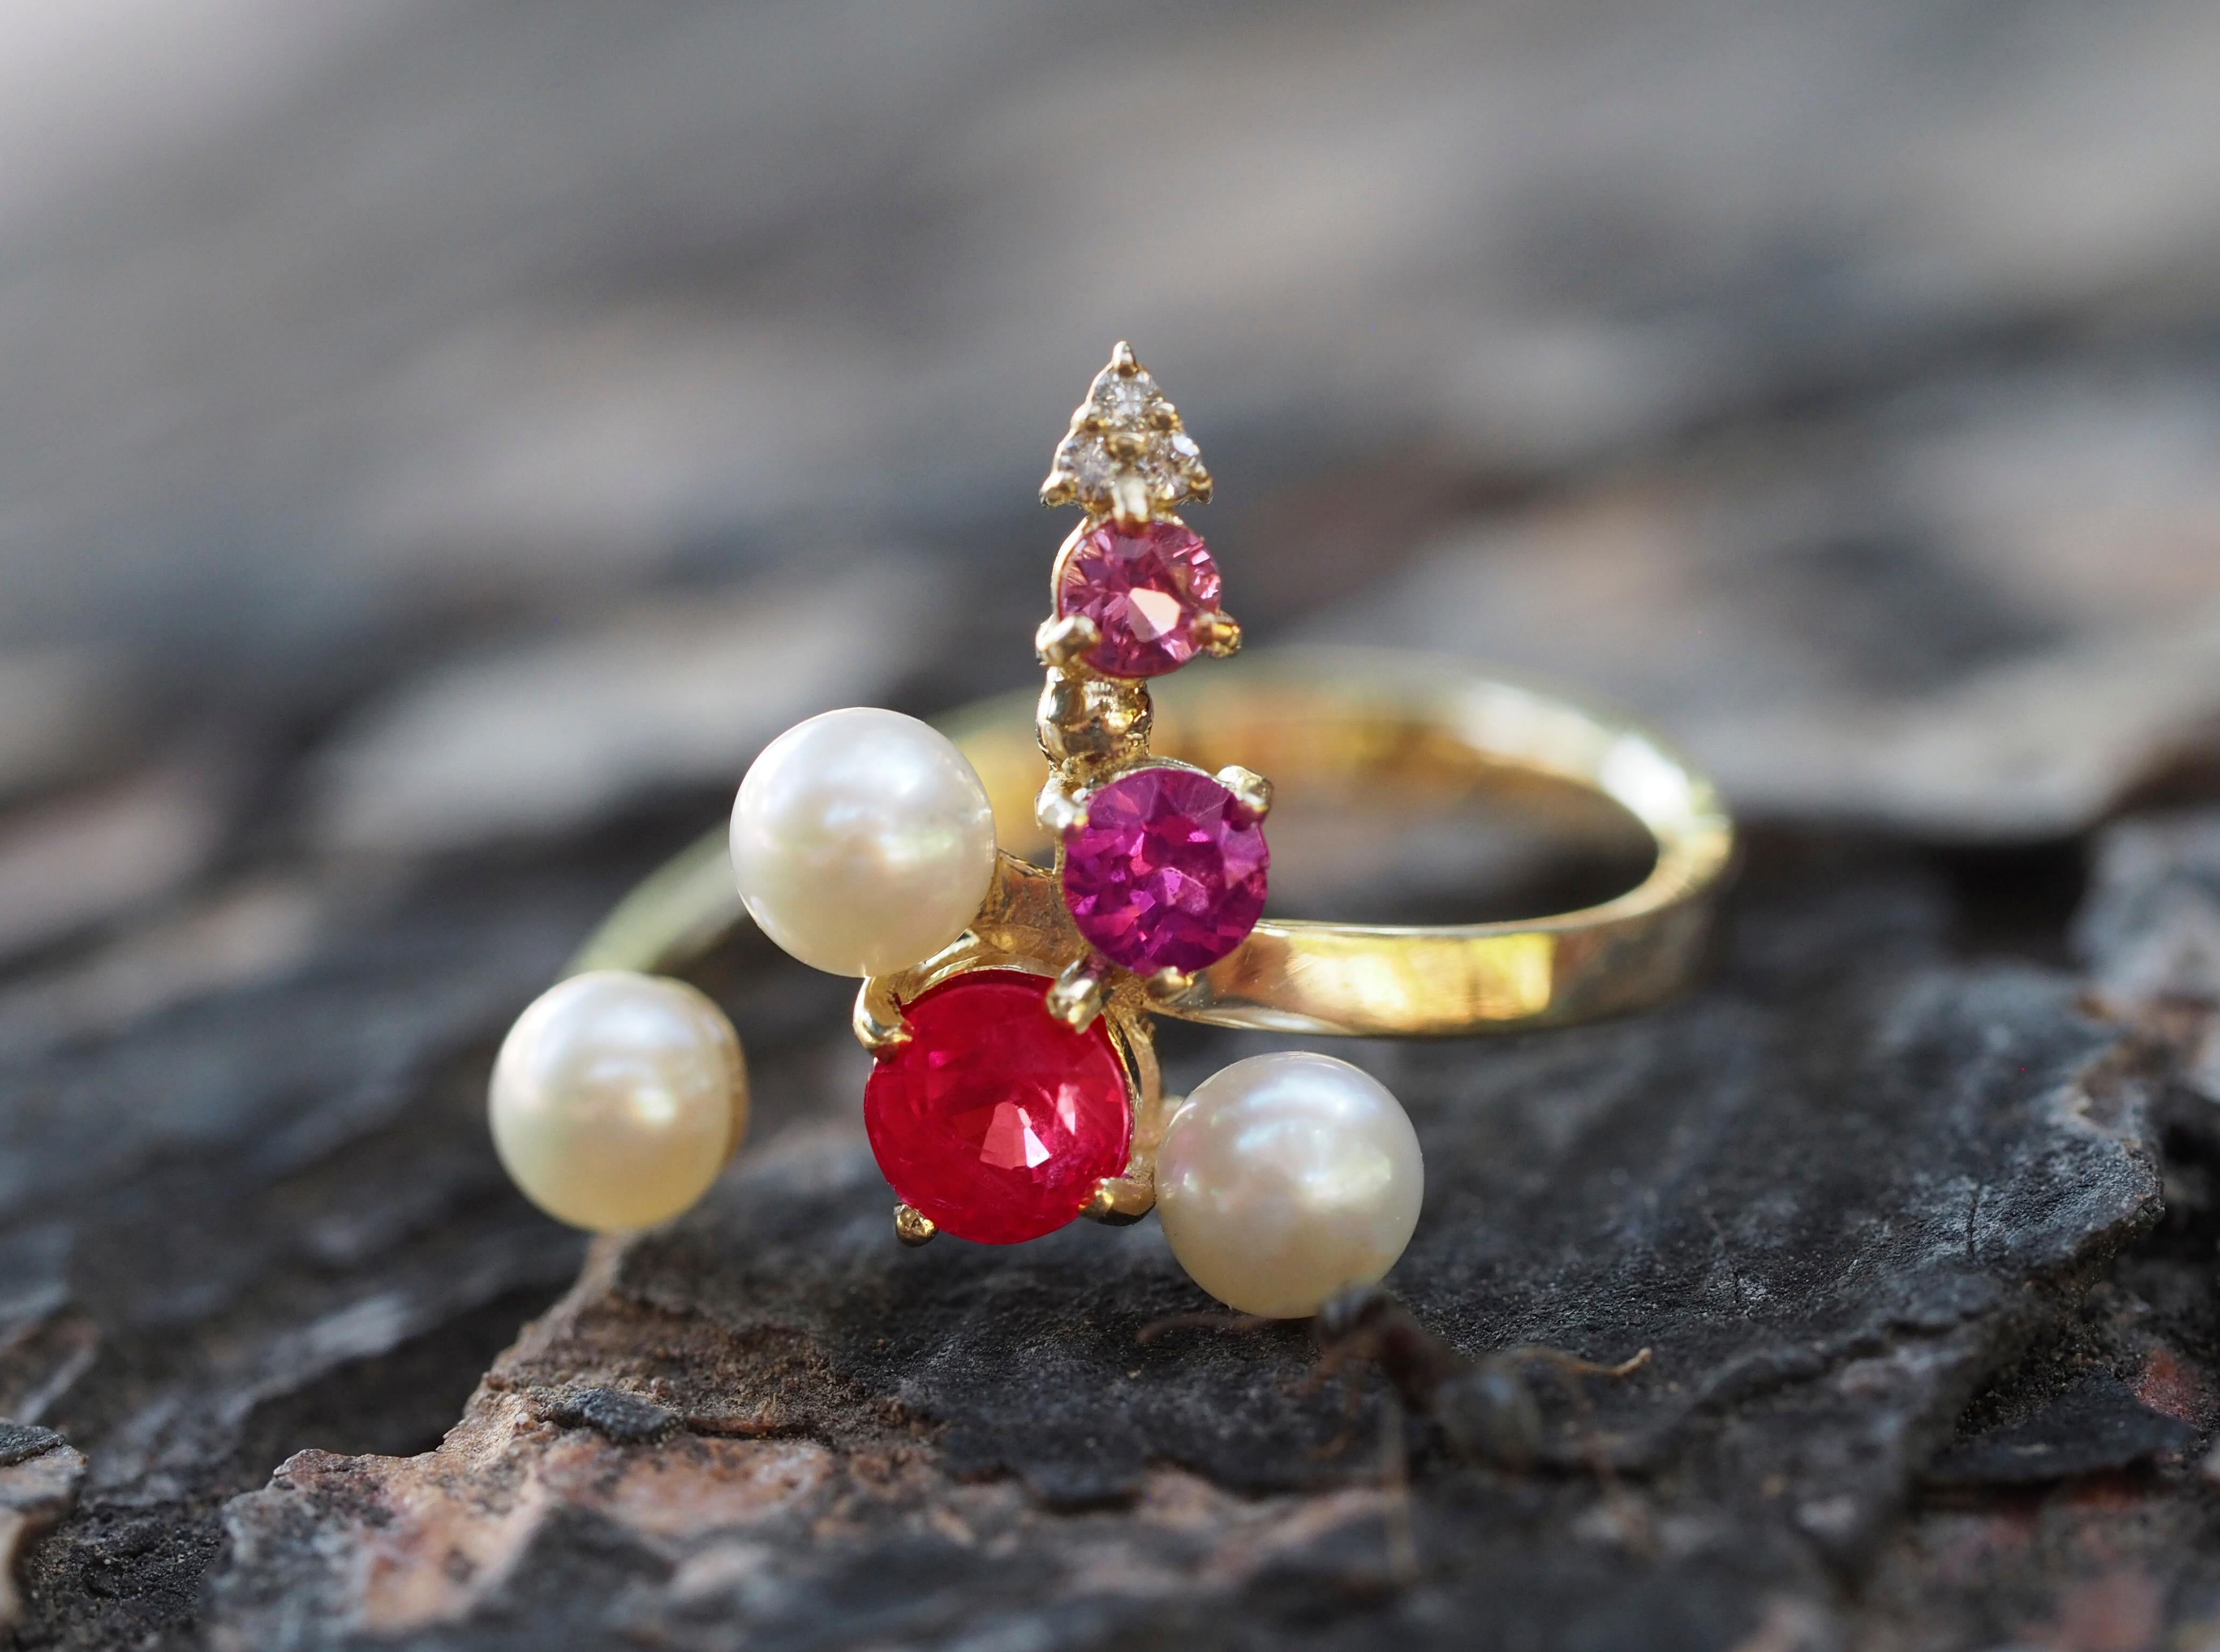 For Sale:   Ruby and multicolored gemstones ring in 14k gold! 2